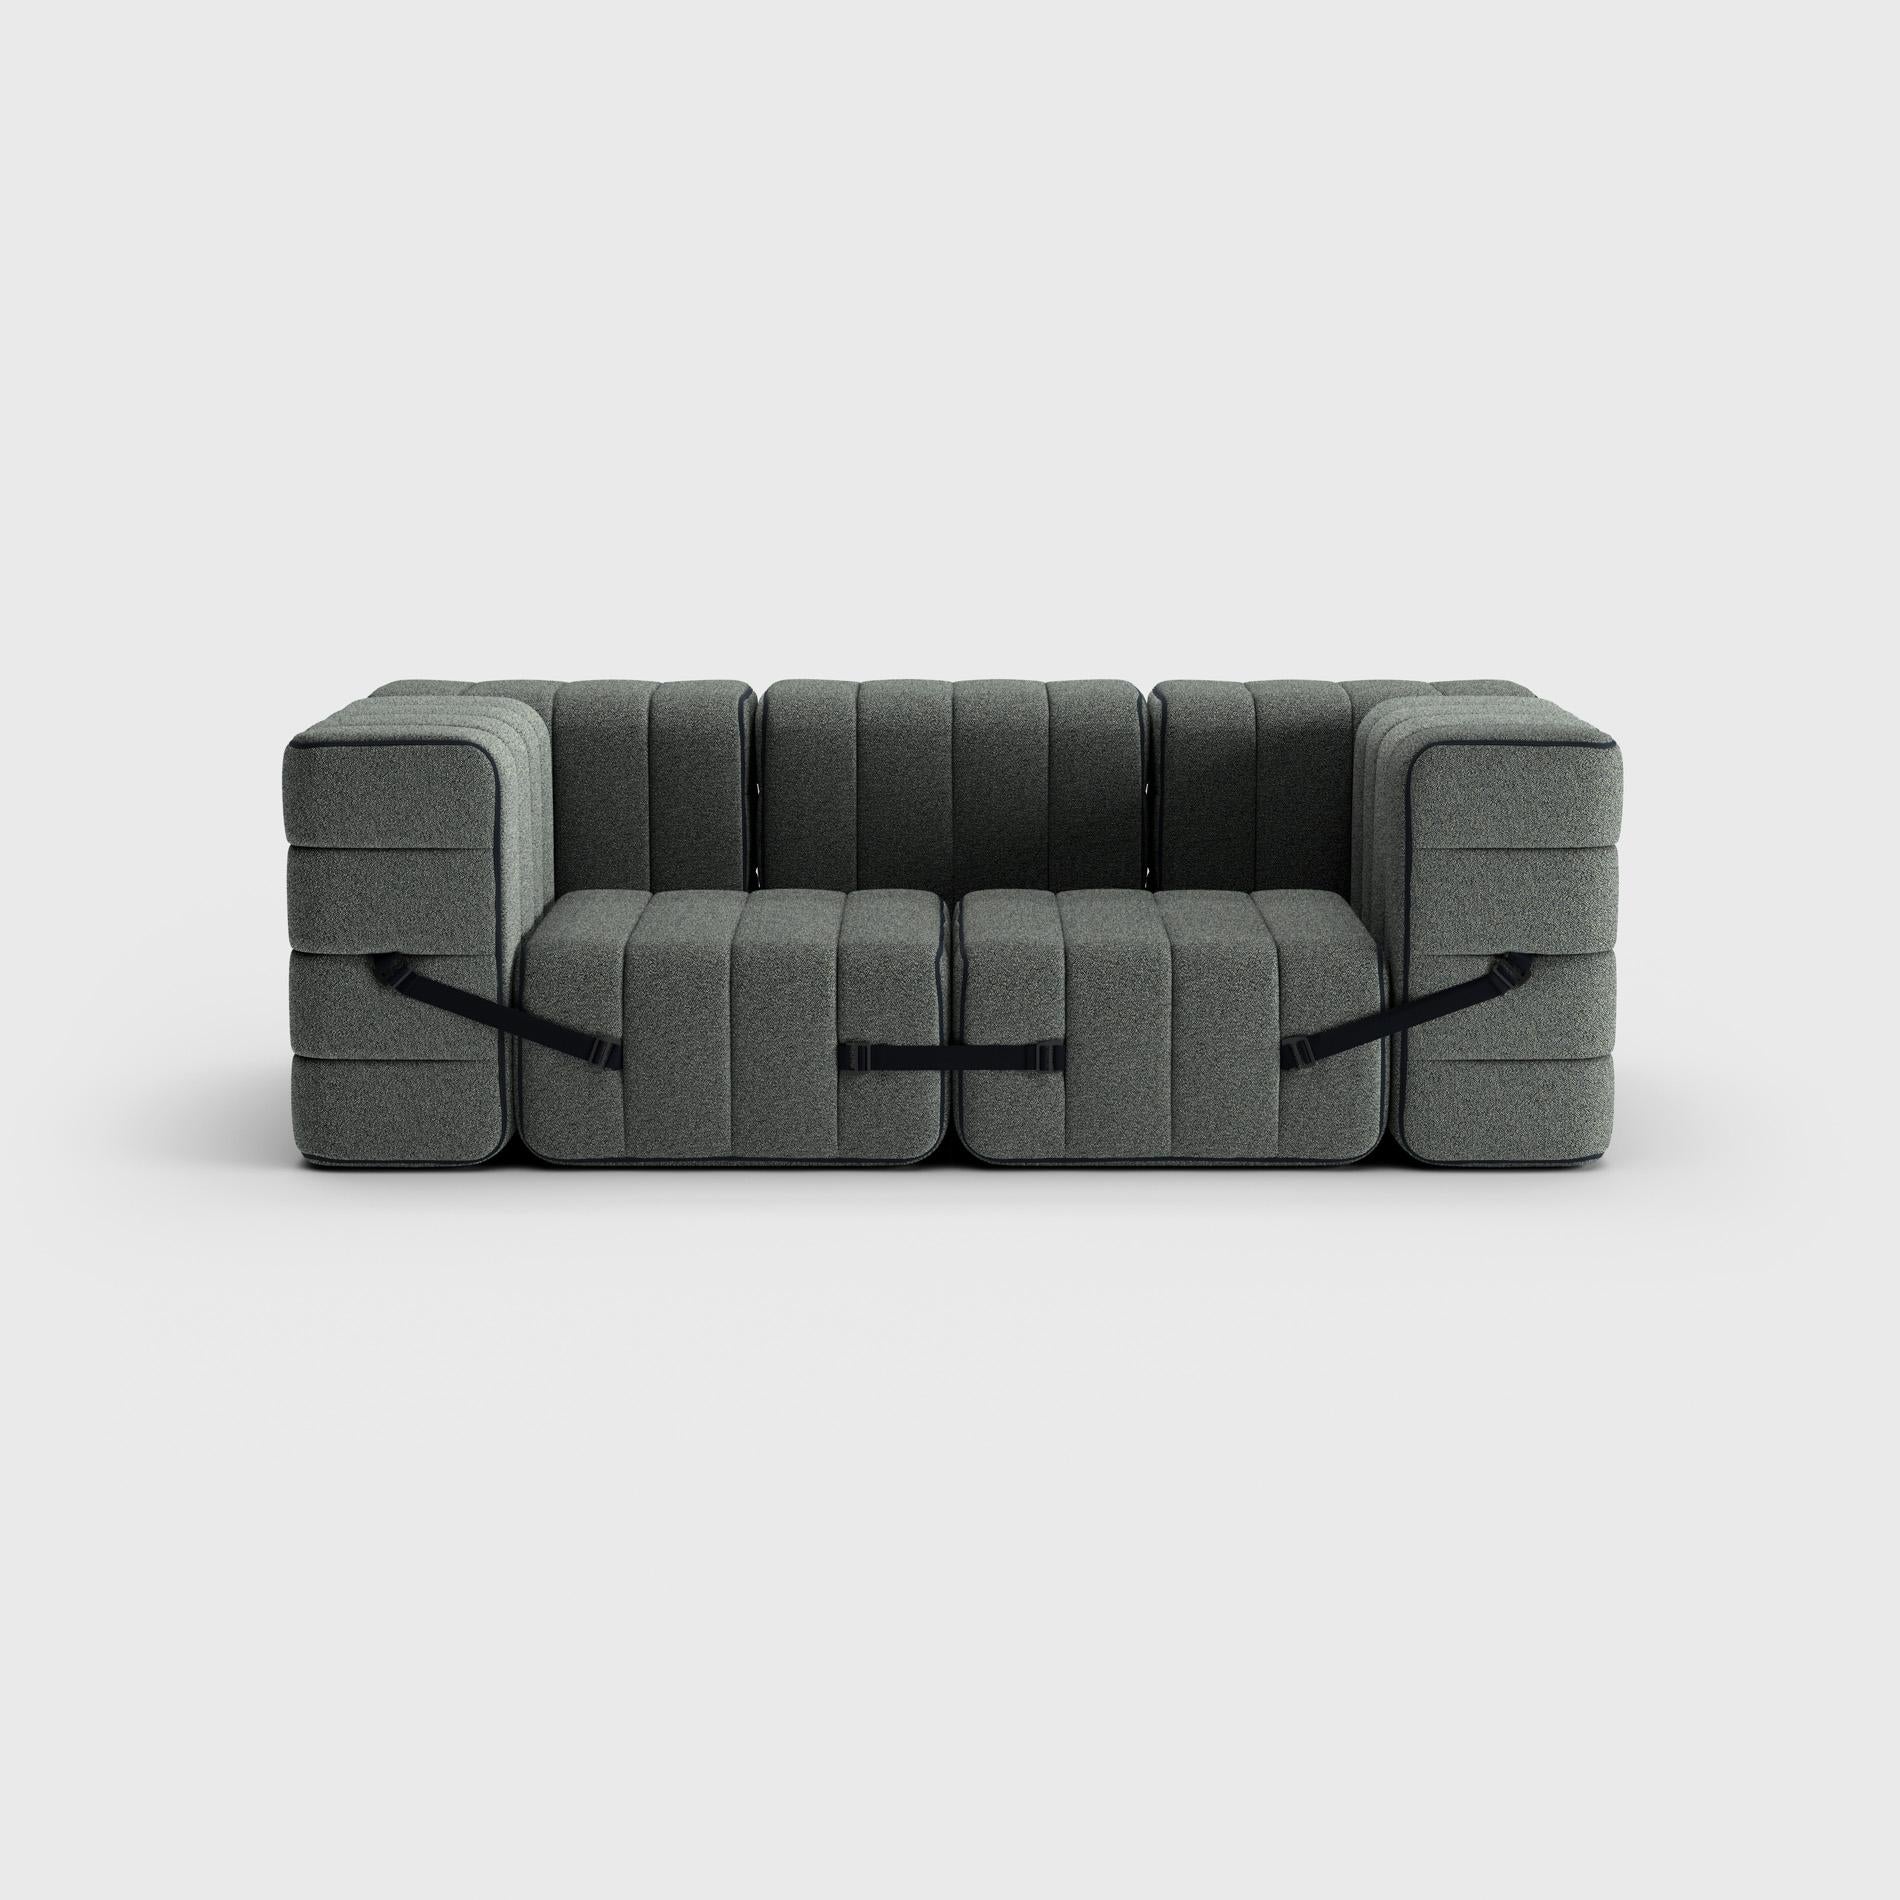 Curt Single Module, Fabric Sera 'Gravel Grey', Curt Modular Sofa System In New Condition For Sale In Berlin, BE